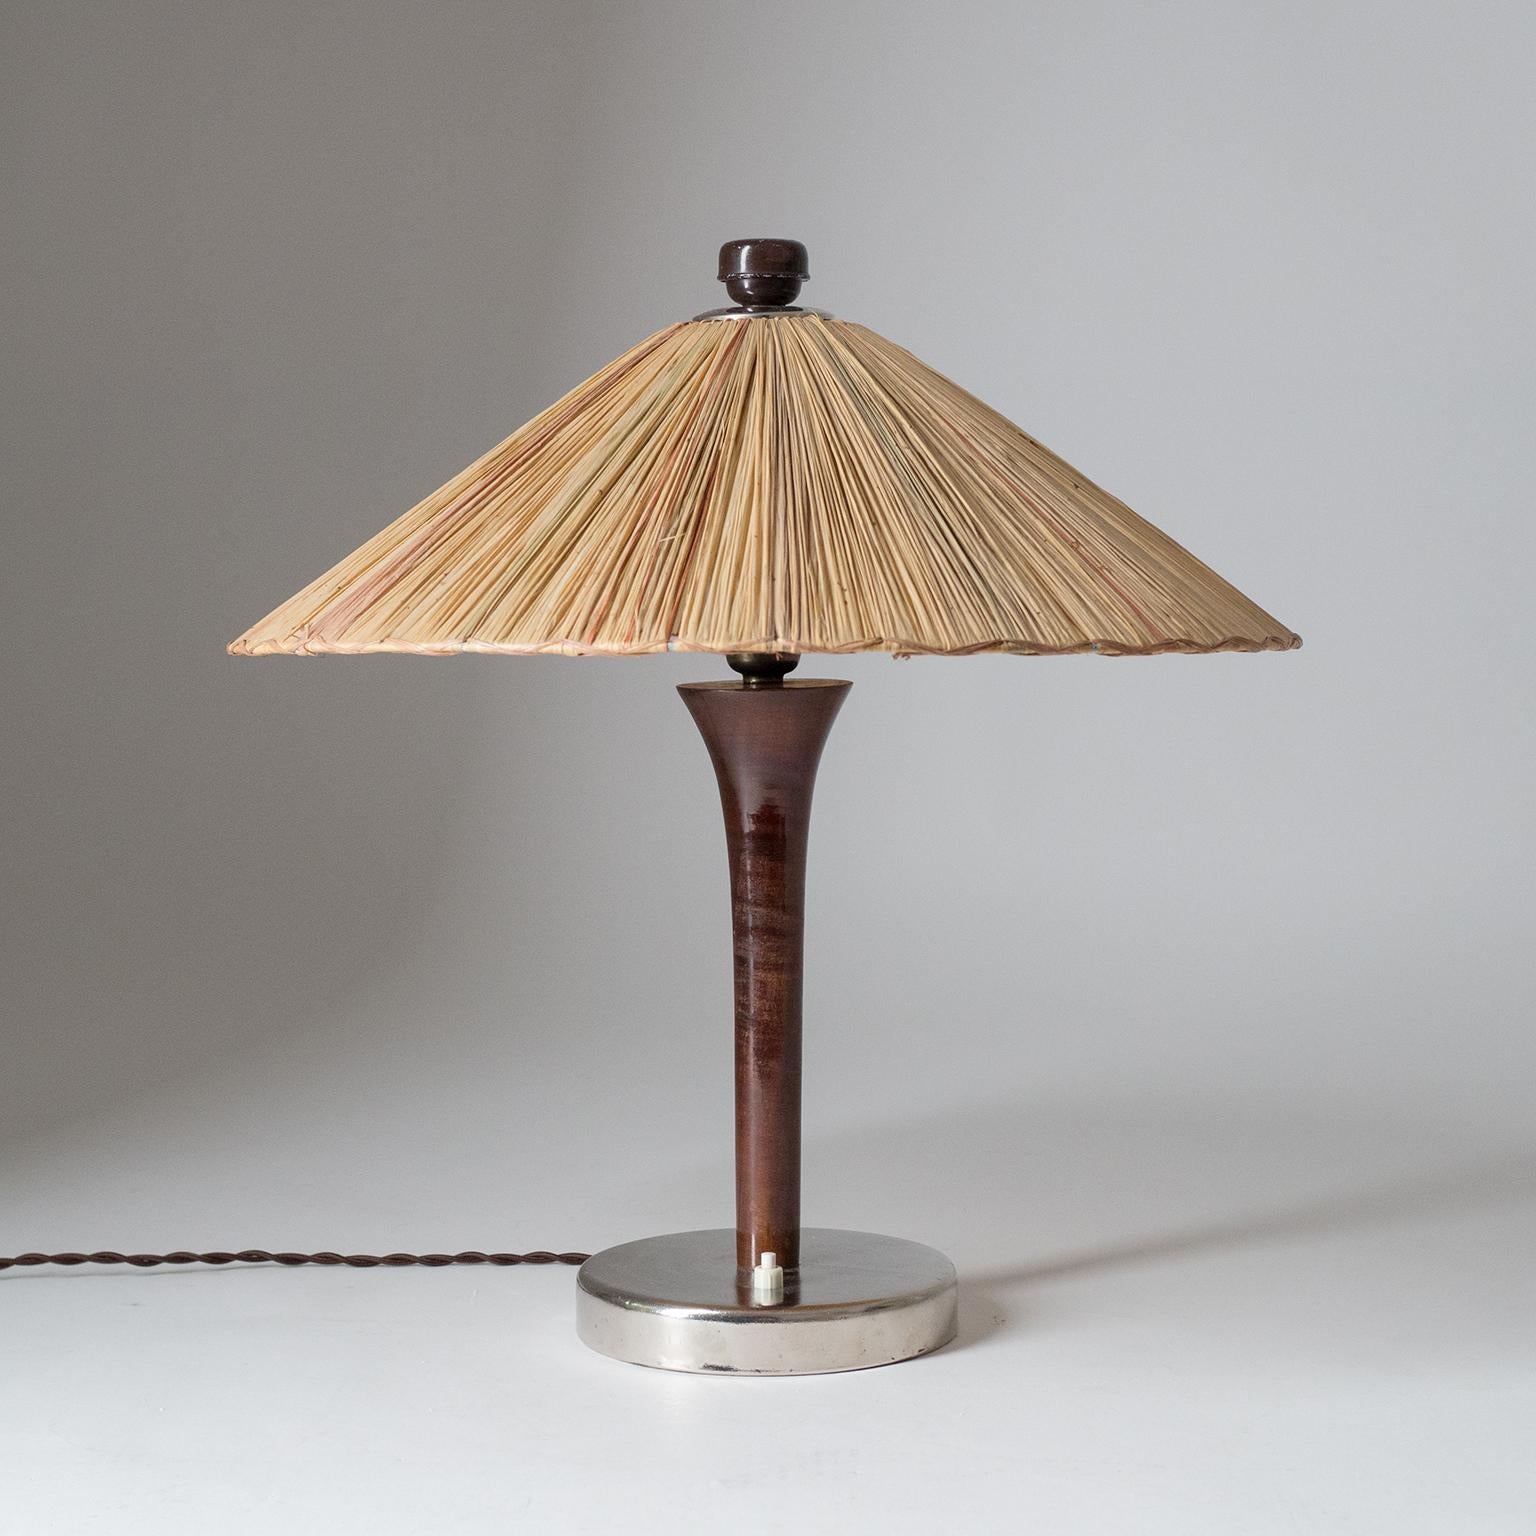 Art Deco Table Lamp, 1930s, with Original Straw Shade 7